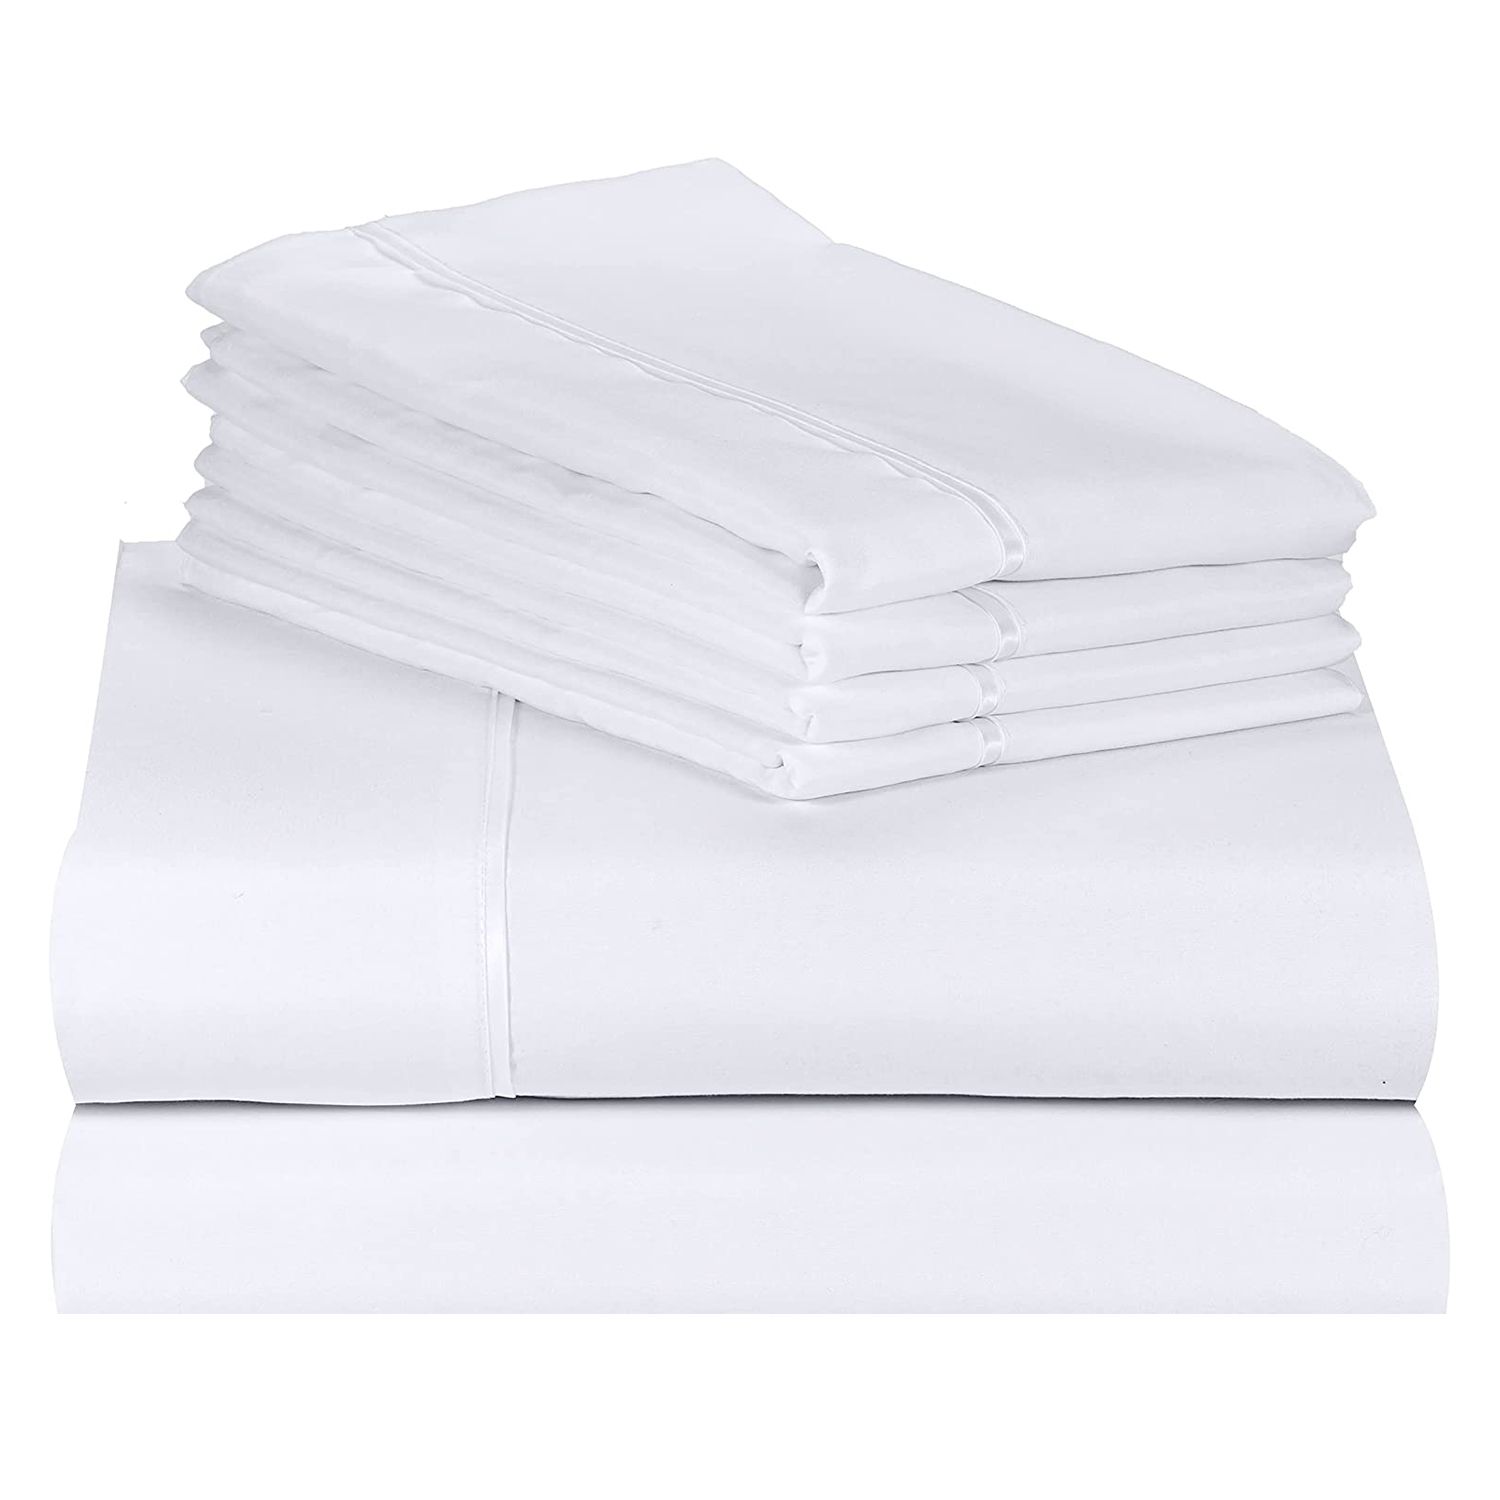 4 Pieces Sheet Set Deep Pocket Up to 14" Bed Sheet Luxury 3000 Series 